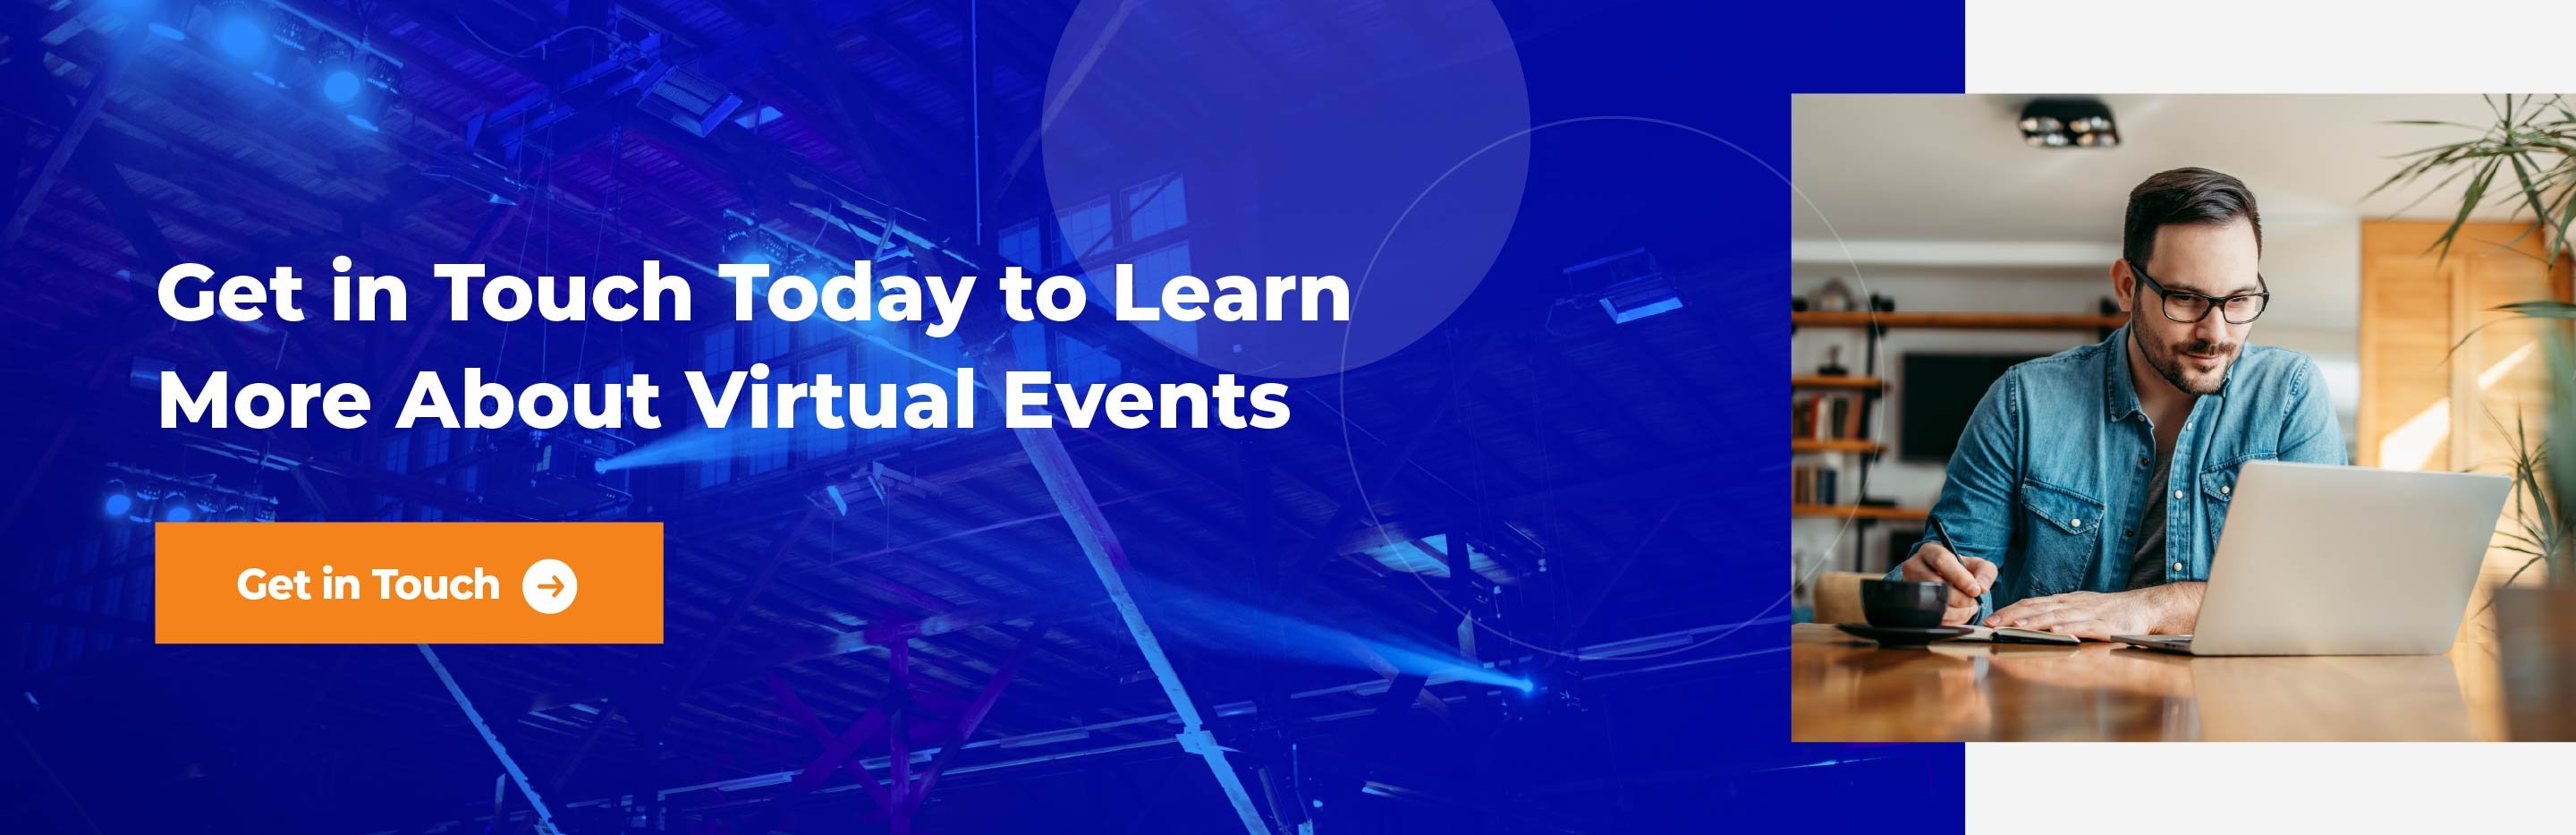 Virtual Event Content Trends - contact us